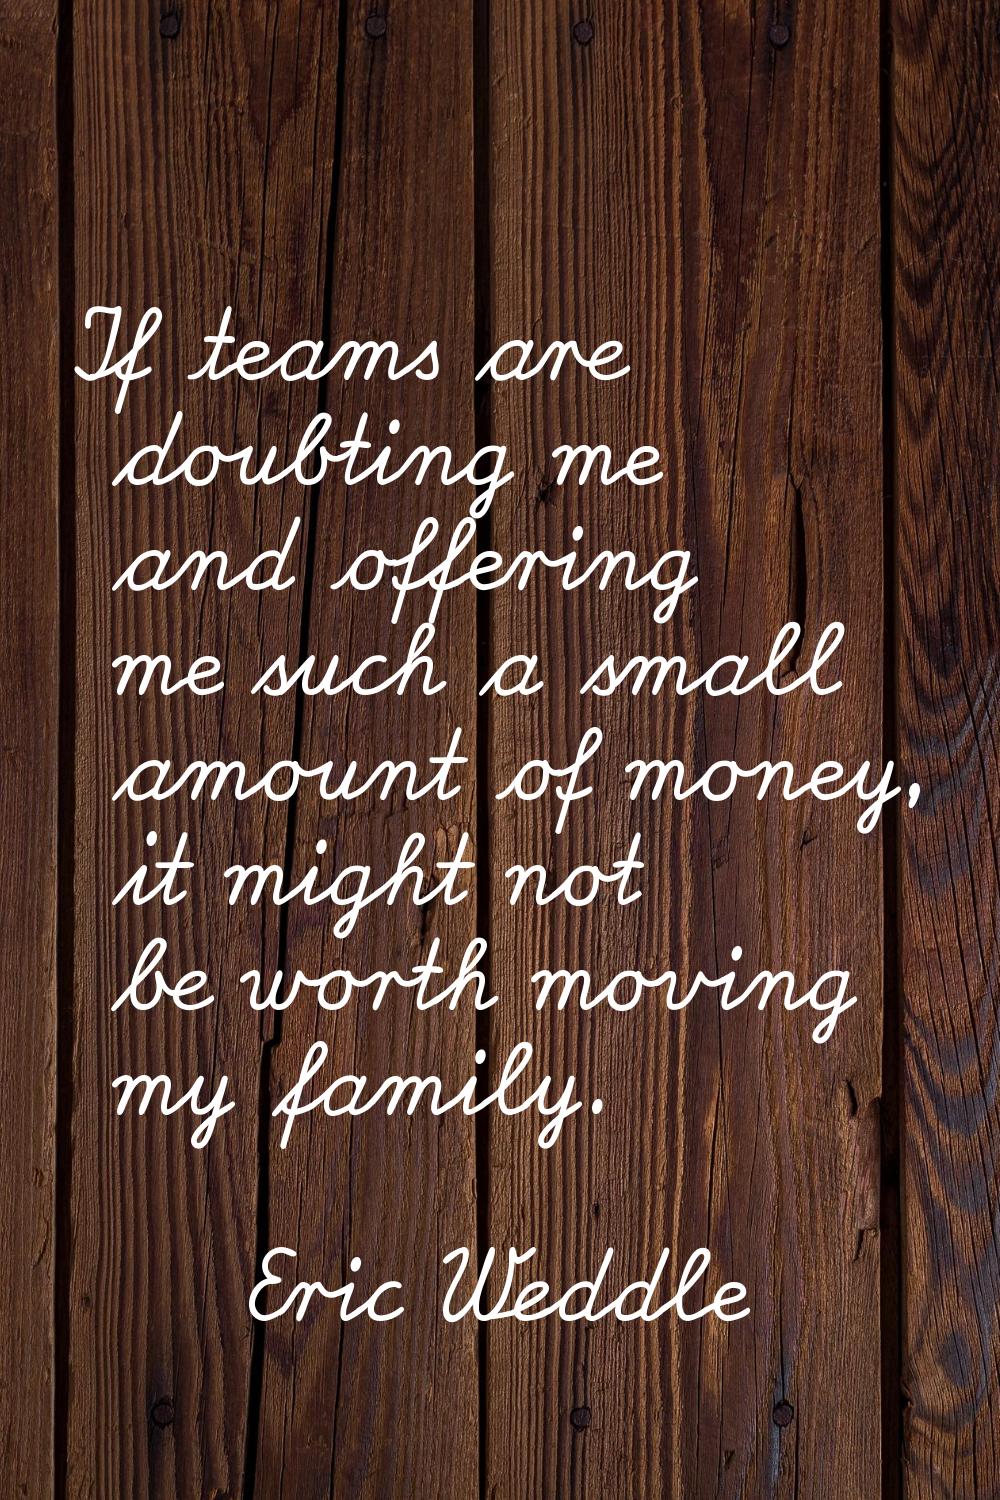 If teams are doubting me and offering me such a small amount of money, it might not be worth moving